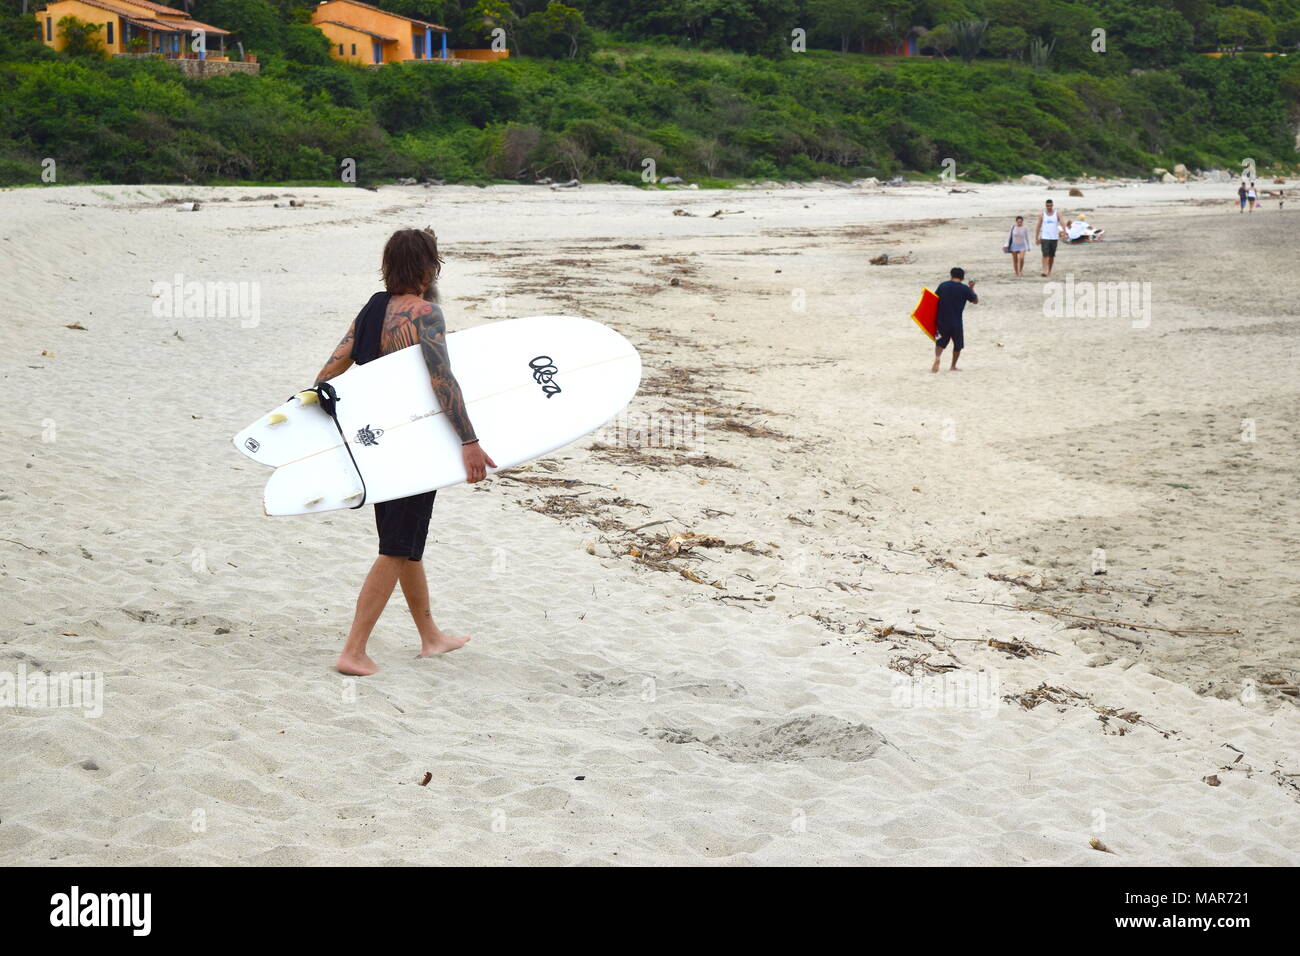 Surfer tattooed carrying a white surf board walking on sandy beach in Mexico Stock Photo